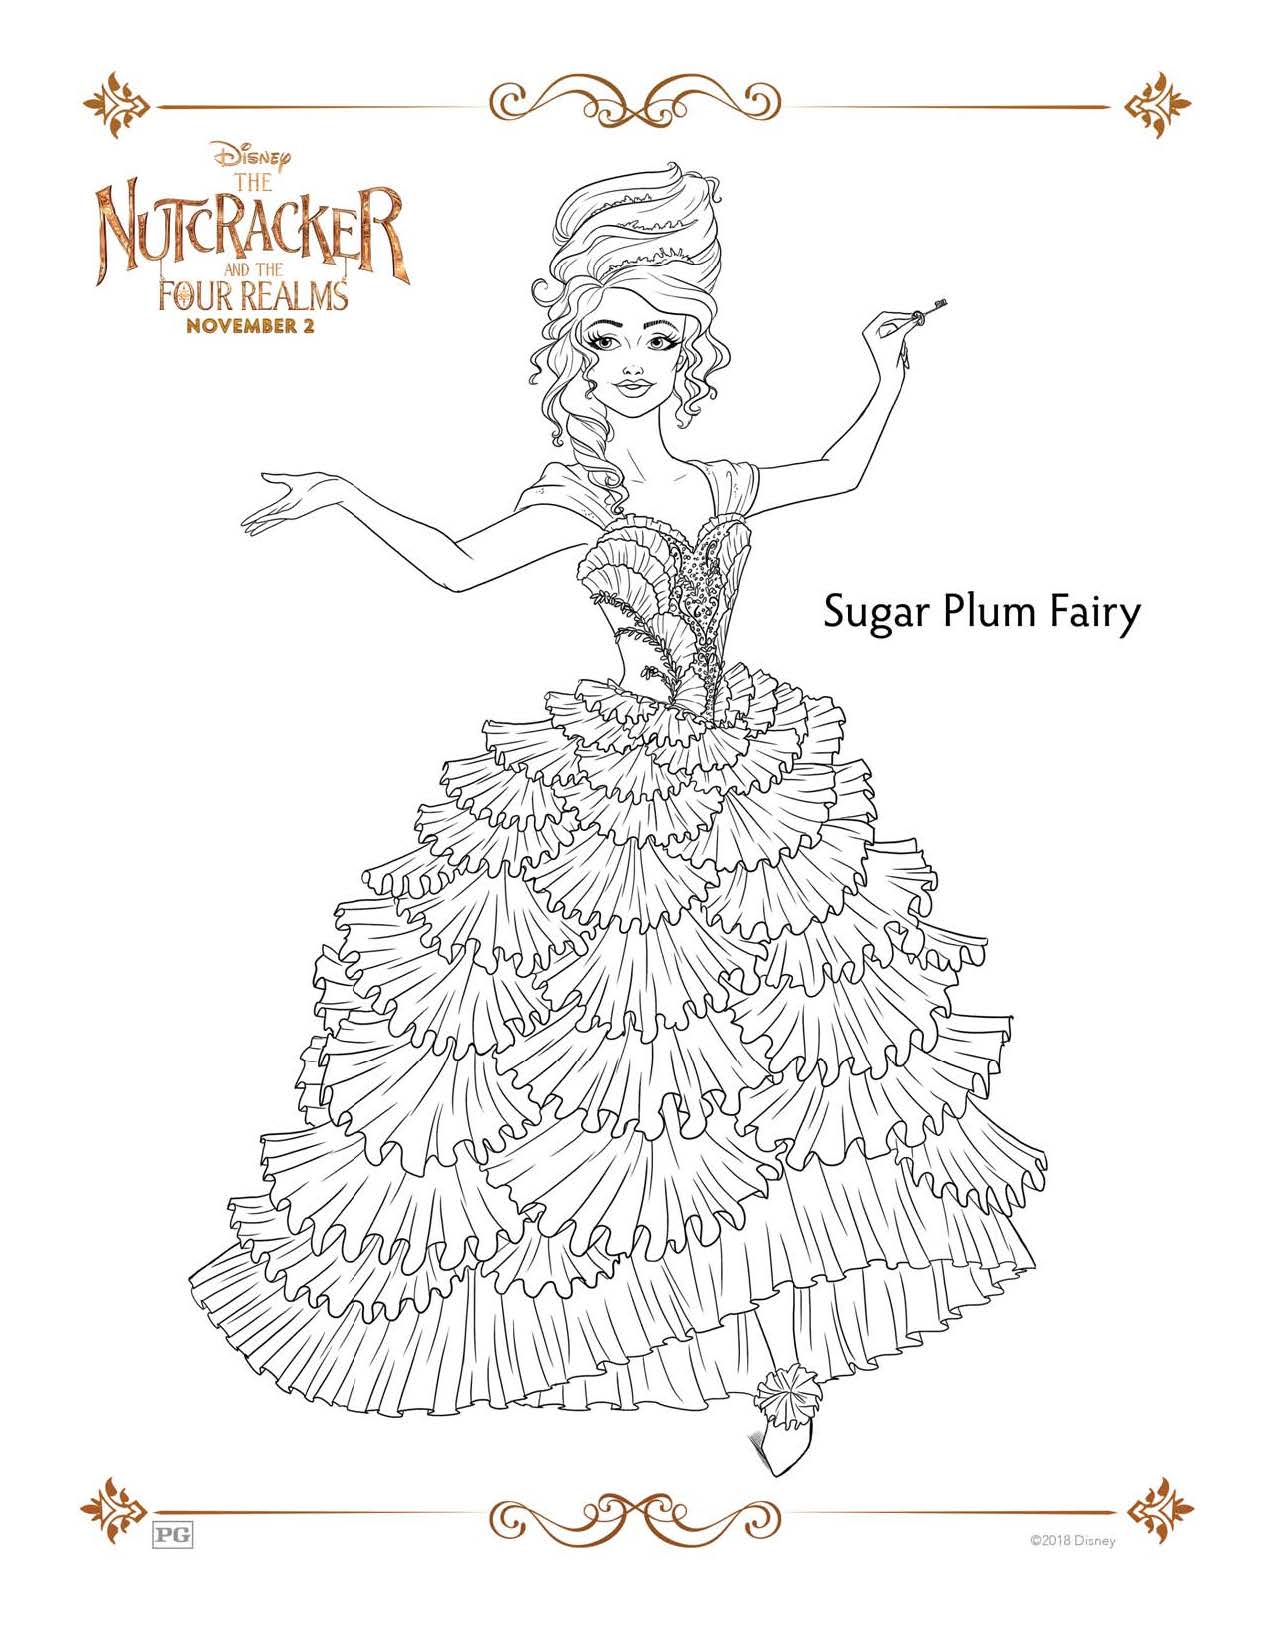 Sugar Plum Fairy - The Nutcracker and The Four Realms Coloring Pages and Activity Sheets